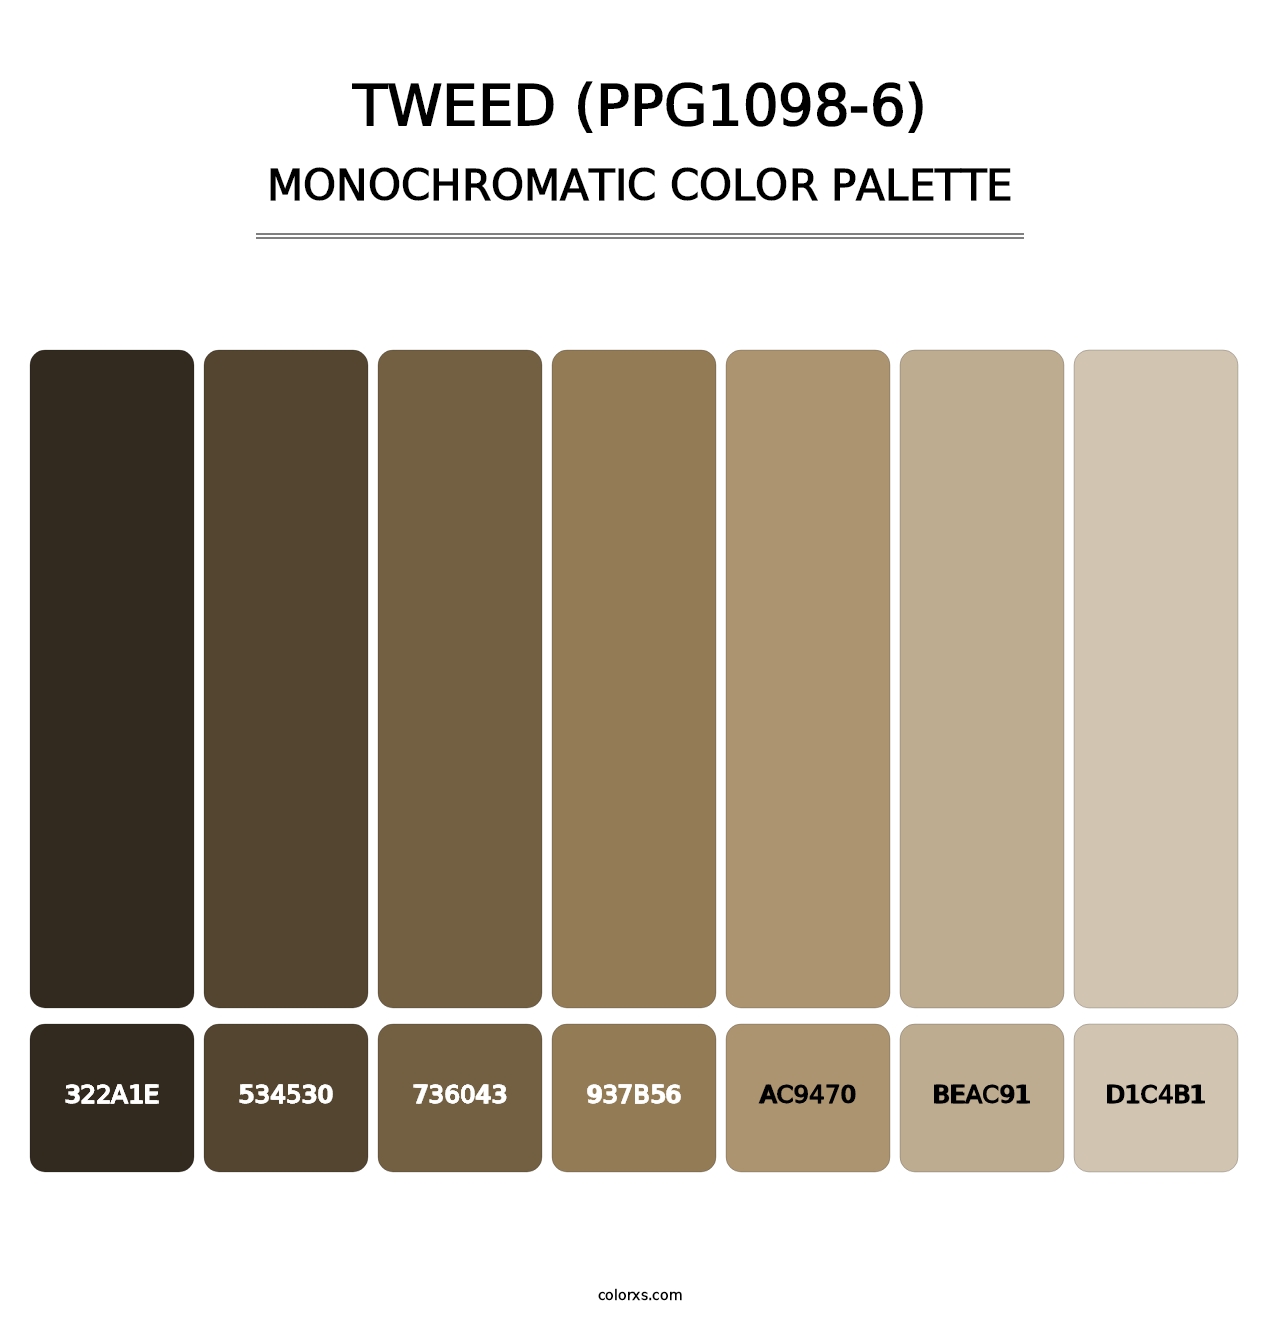 Tweed (PPG1098-6) - Monochromatic Color Palette